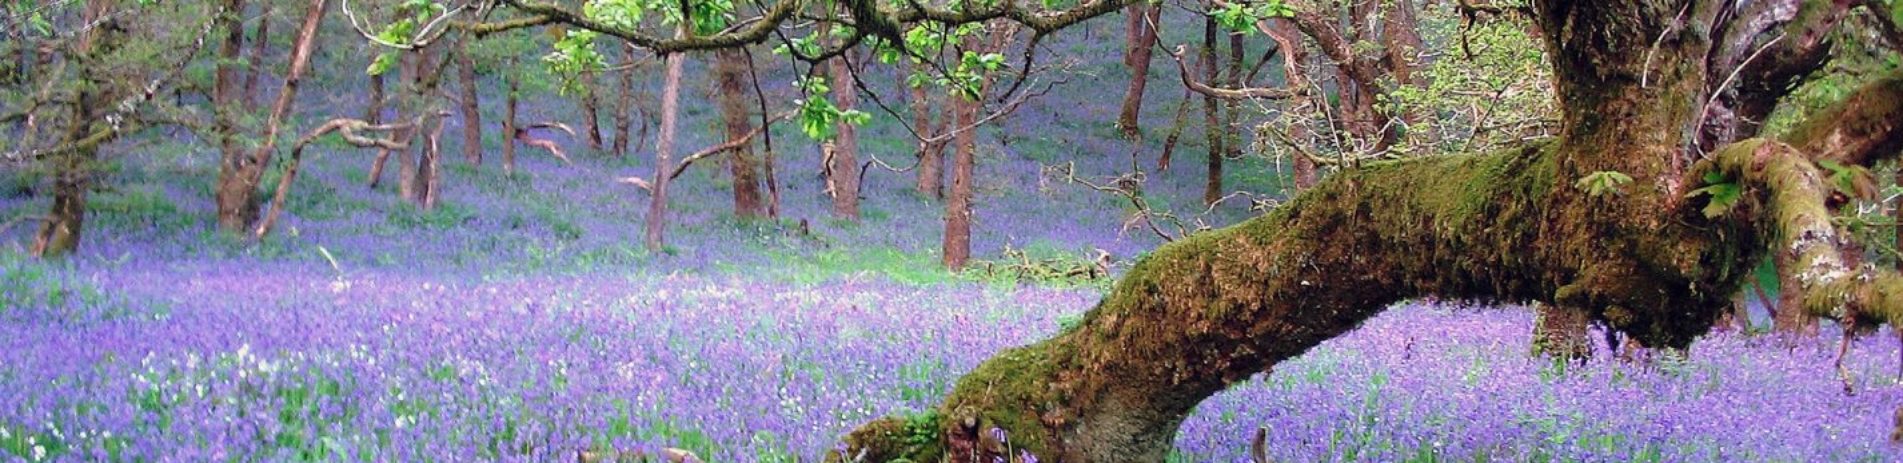 bluebells-and-trees